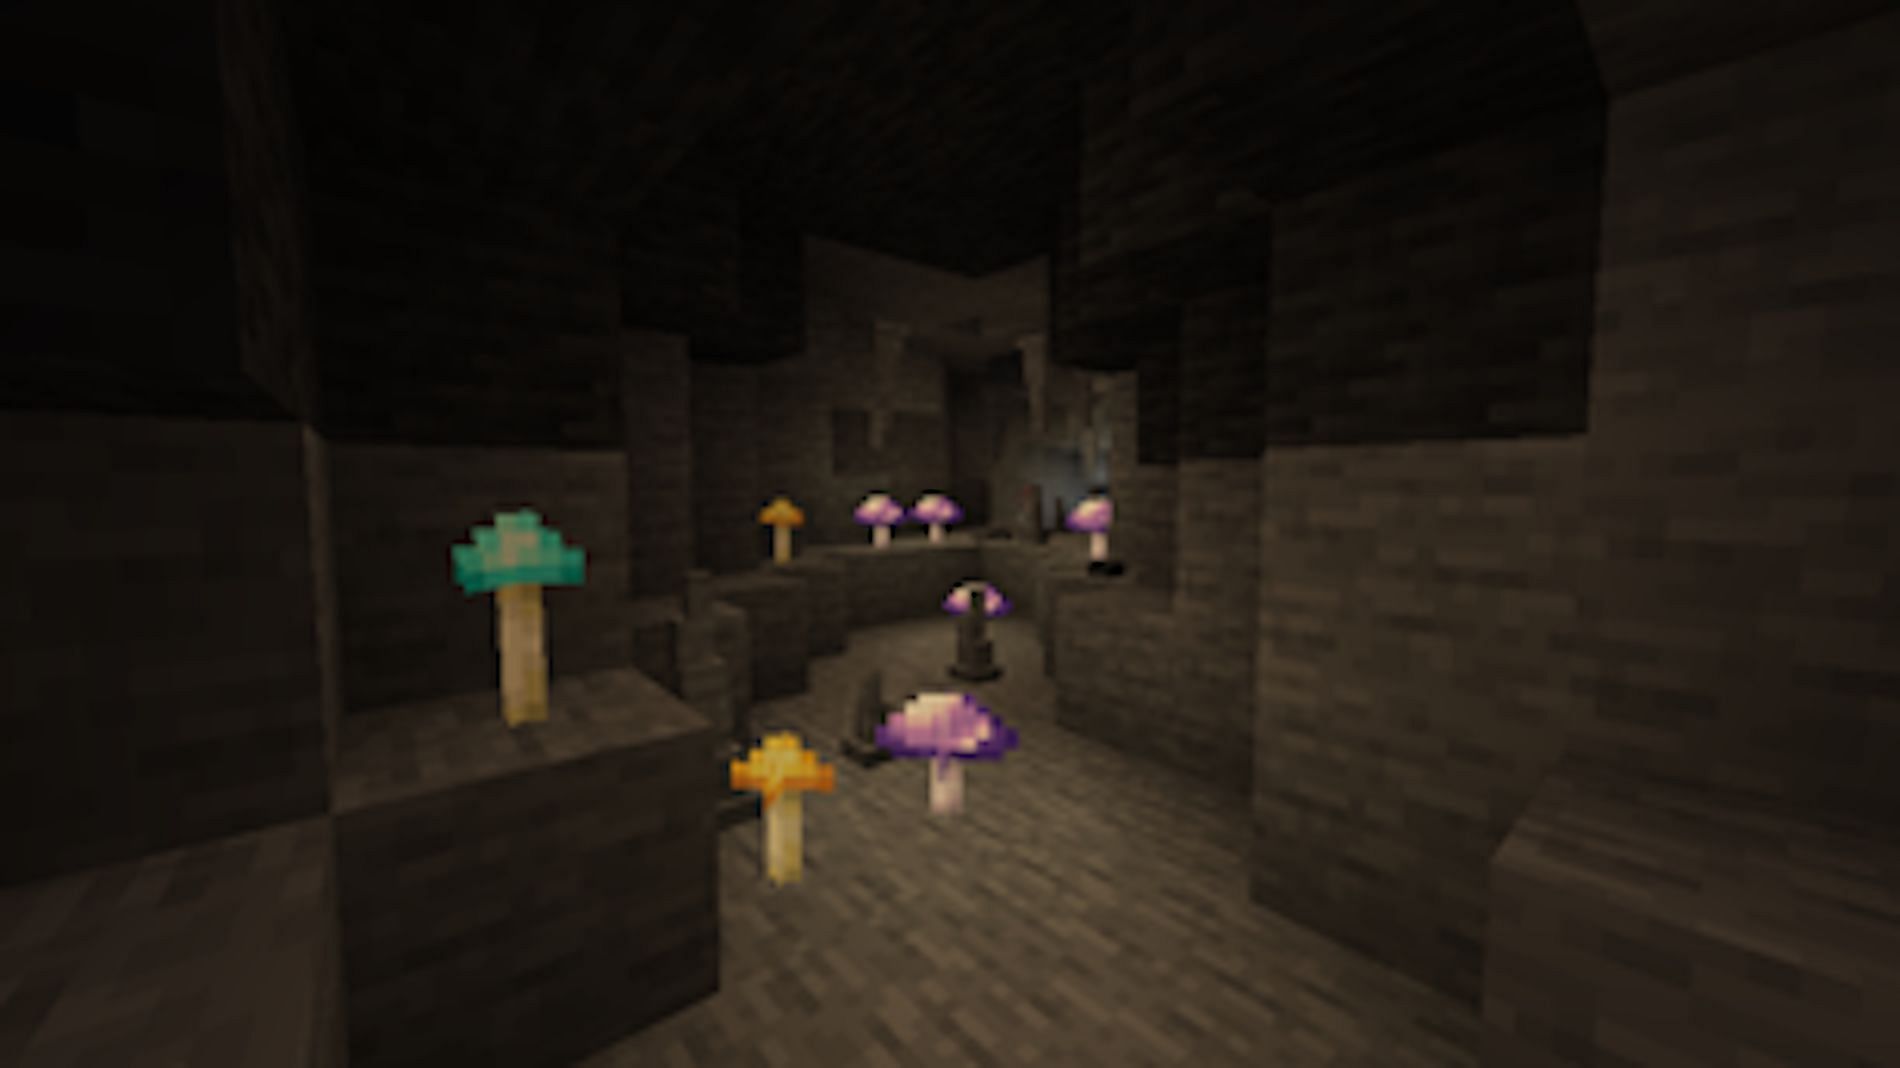 Mushrooms in a cave from the Extended Caves mod [Image via CurseForge]